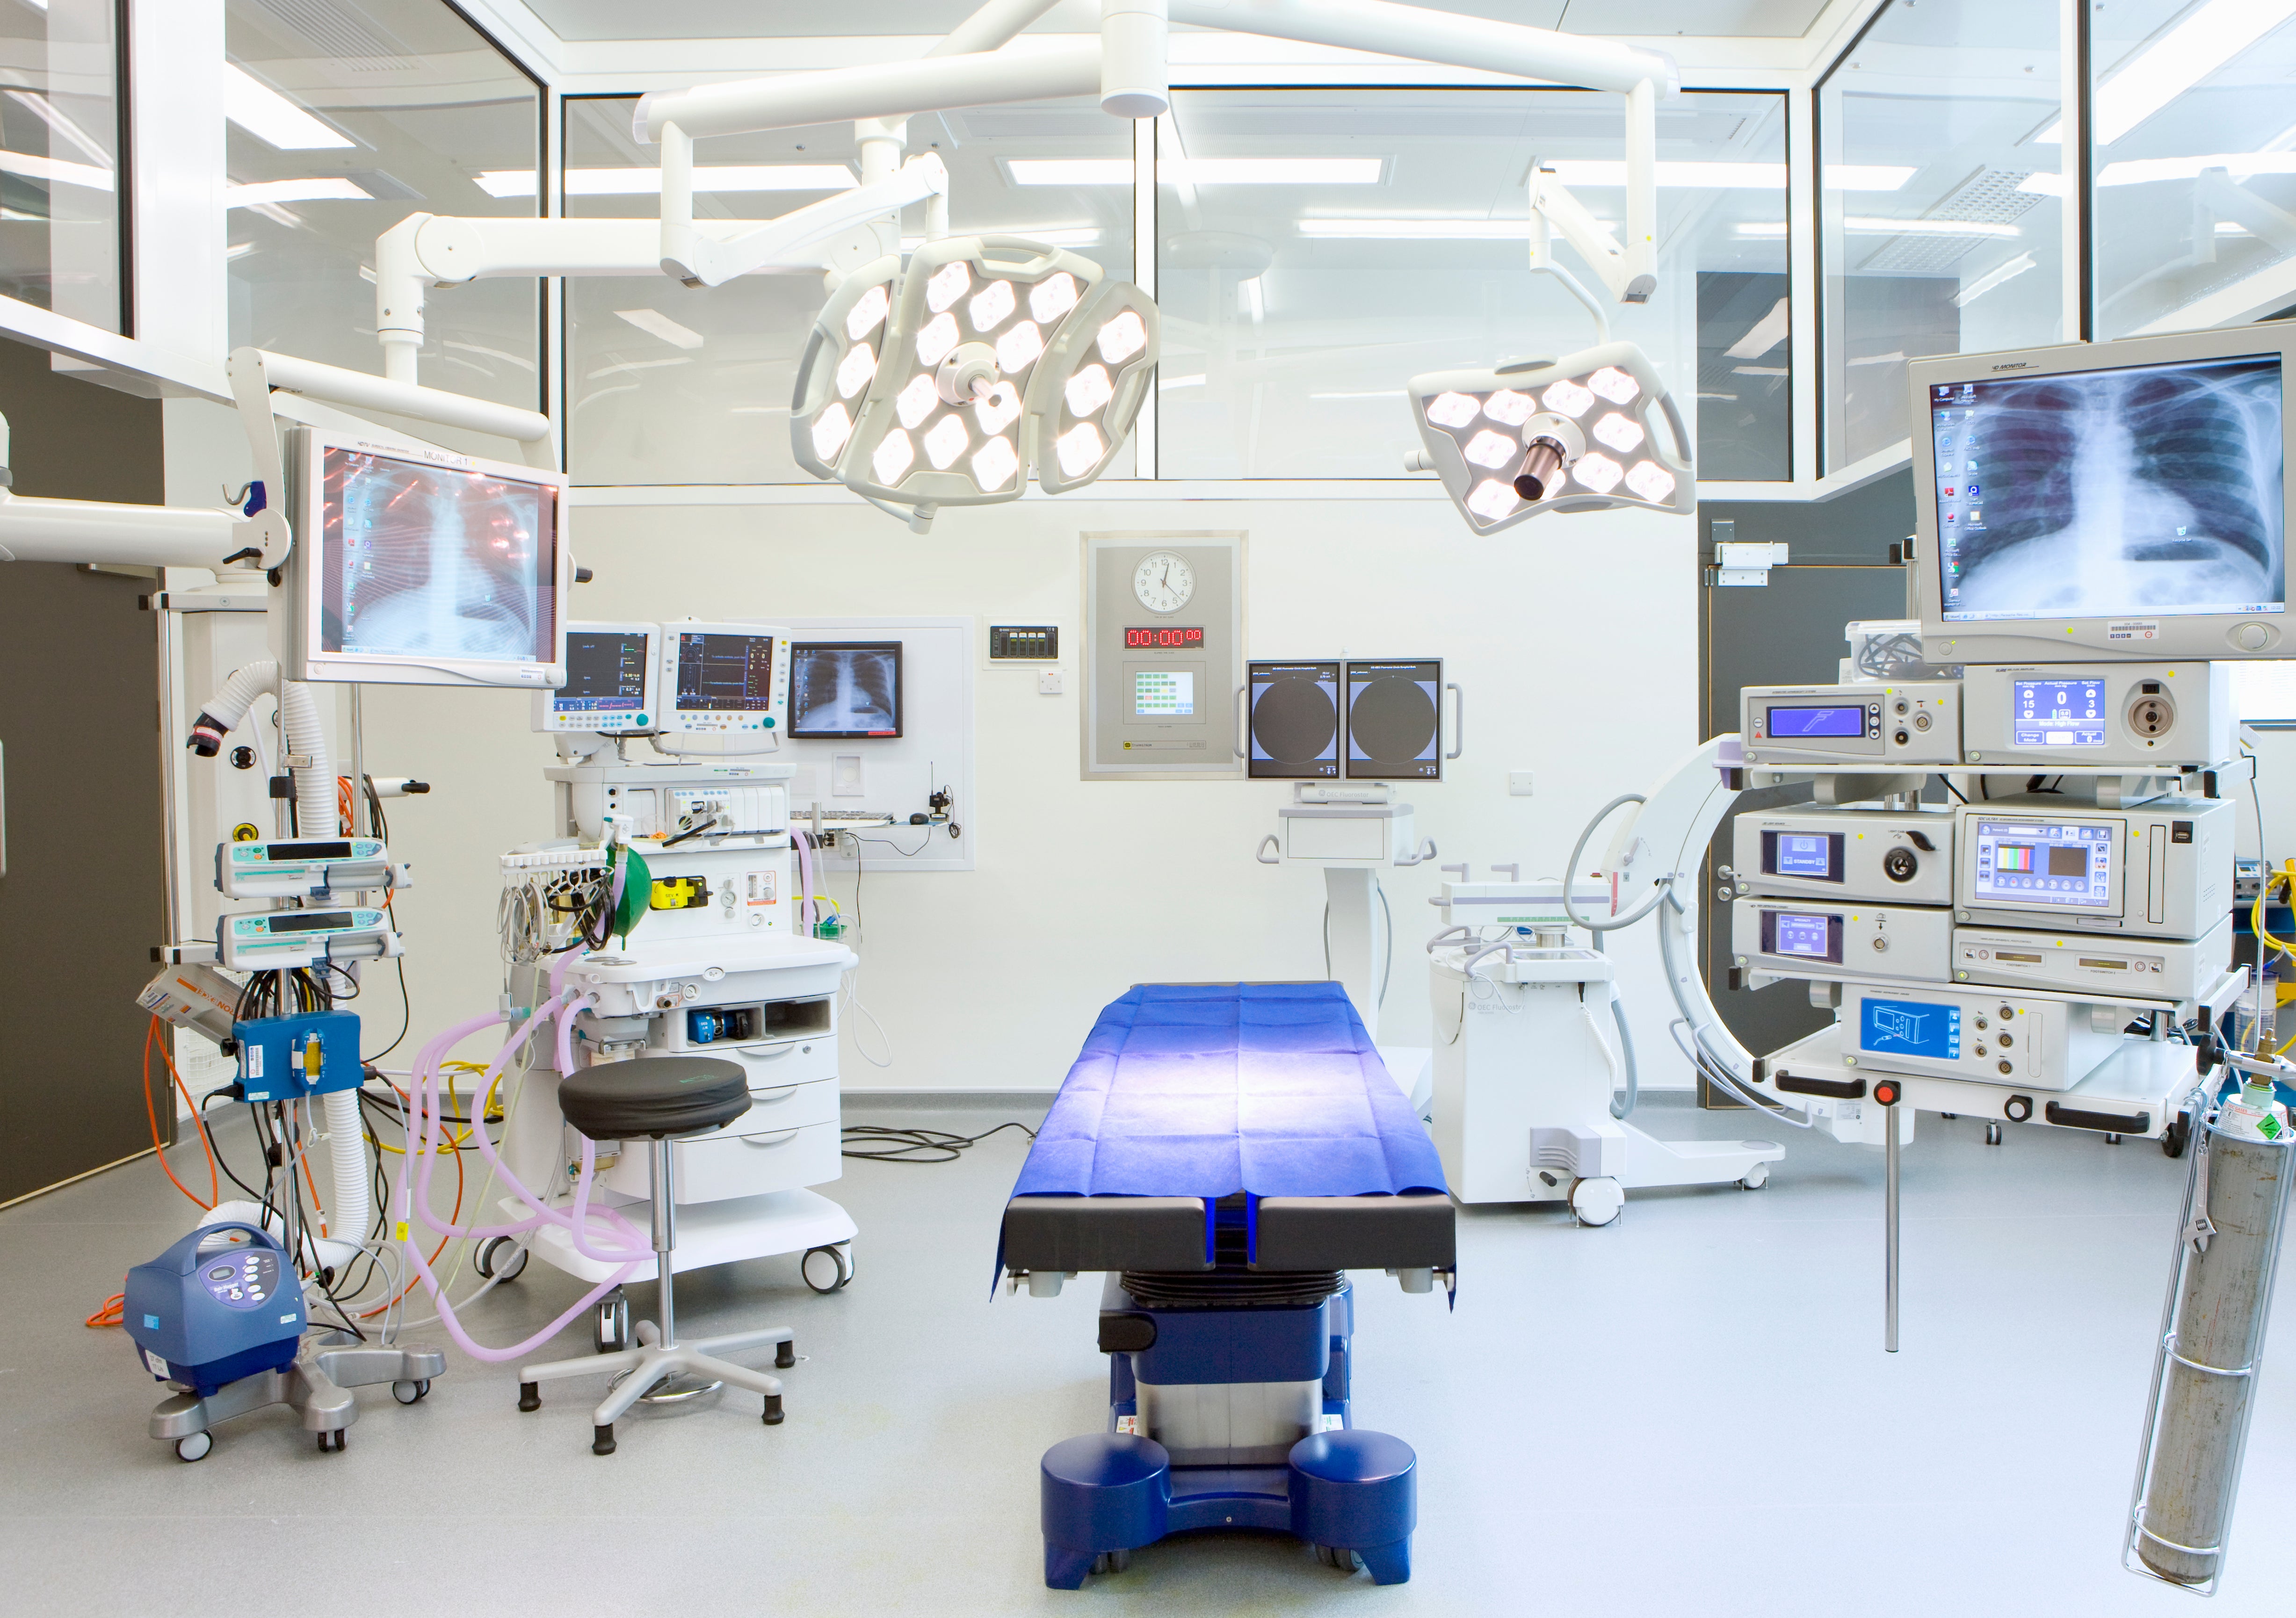 Hospital operating room with monitors and equipment